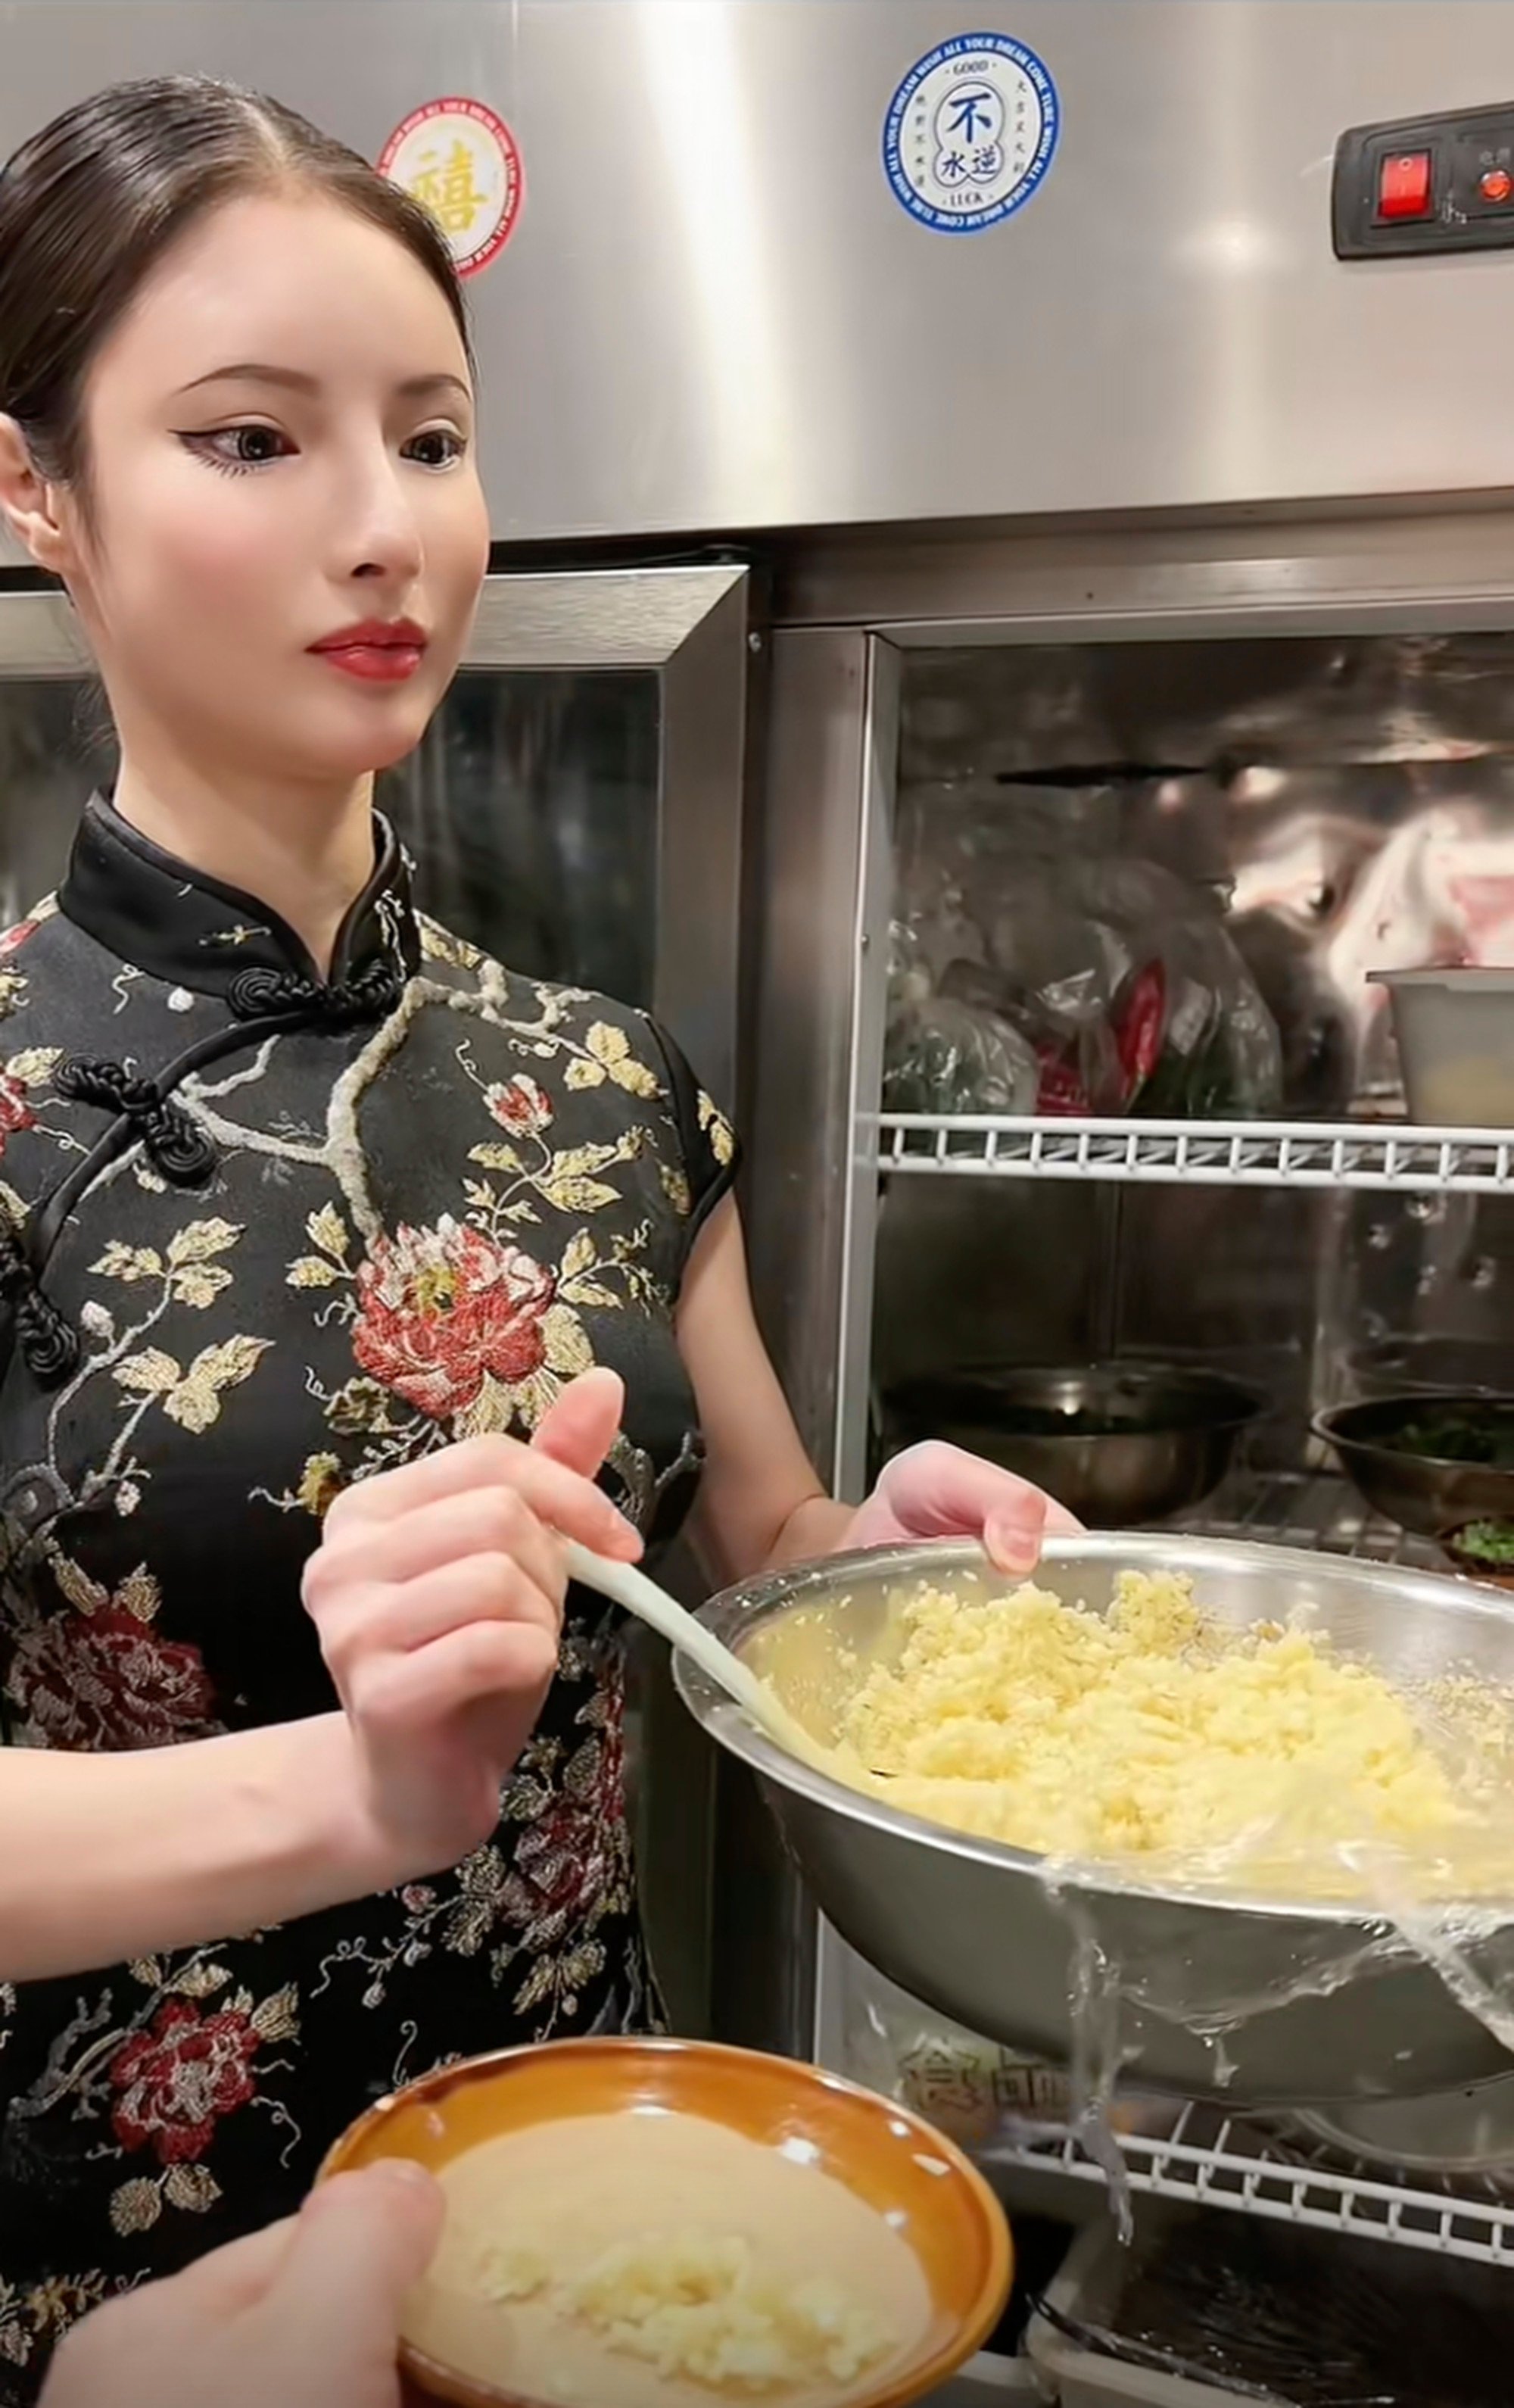 The 26-year-old eatery owner has fooled many people who think she is an actual robot. Photo: Douyin